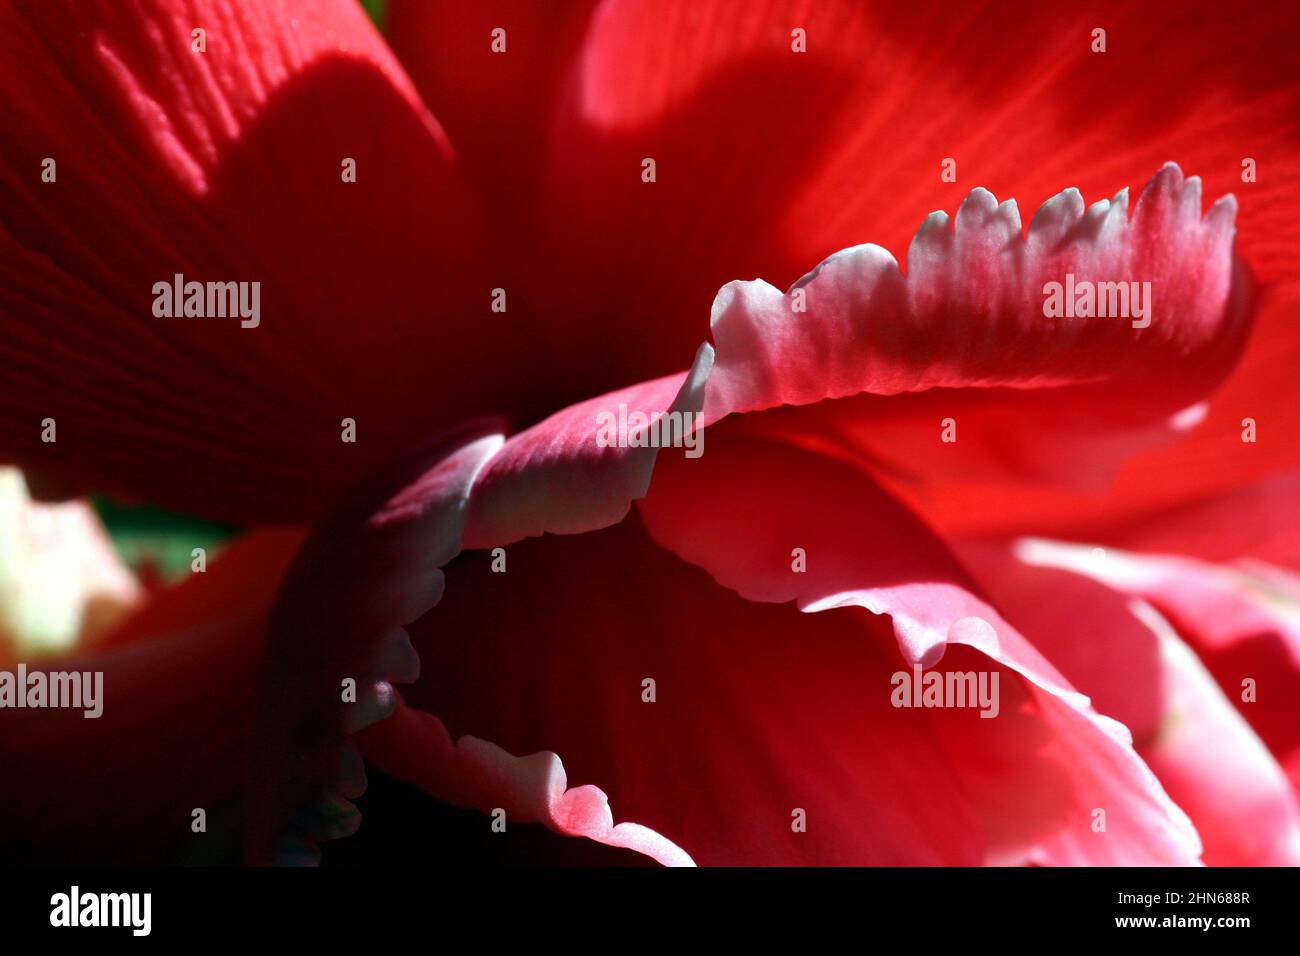 Close Up of Red Flower Petals with Furled White Tips Stock Photo